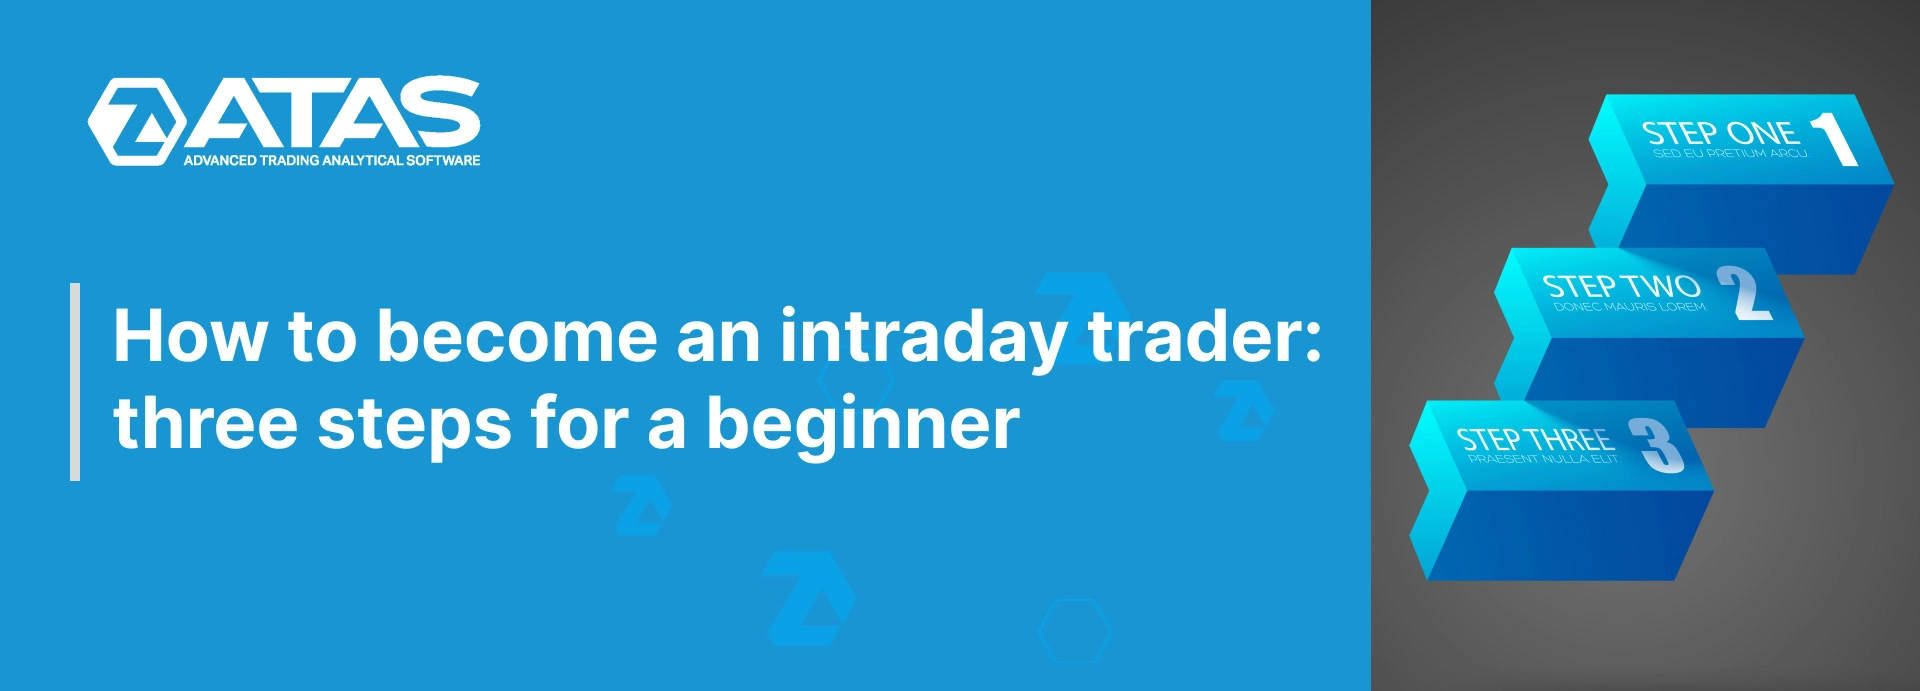 How to become an intraday trader three steps for a beginner